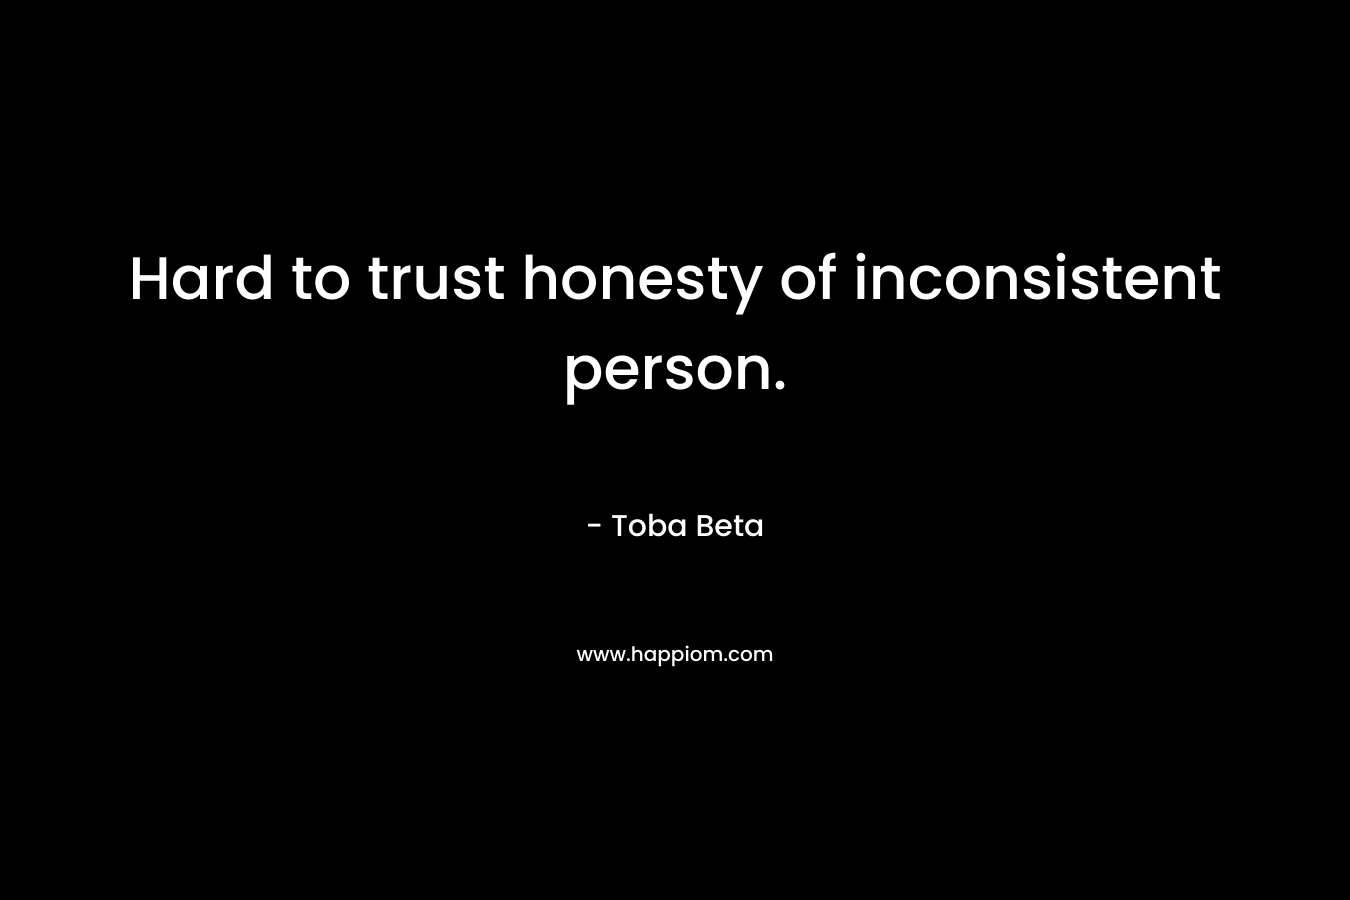 Hard to trust honesty of inconsistent person.